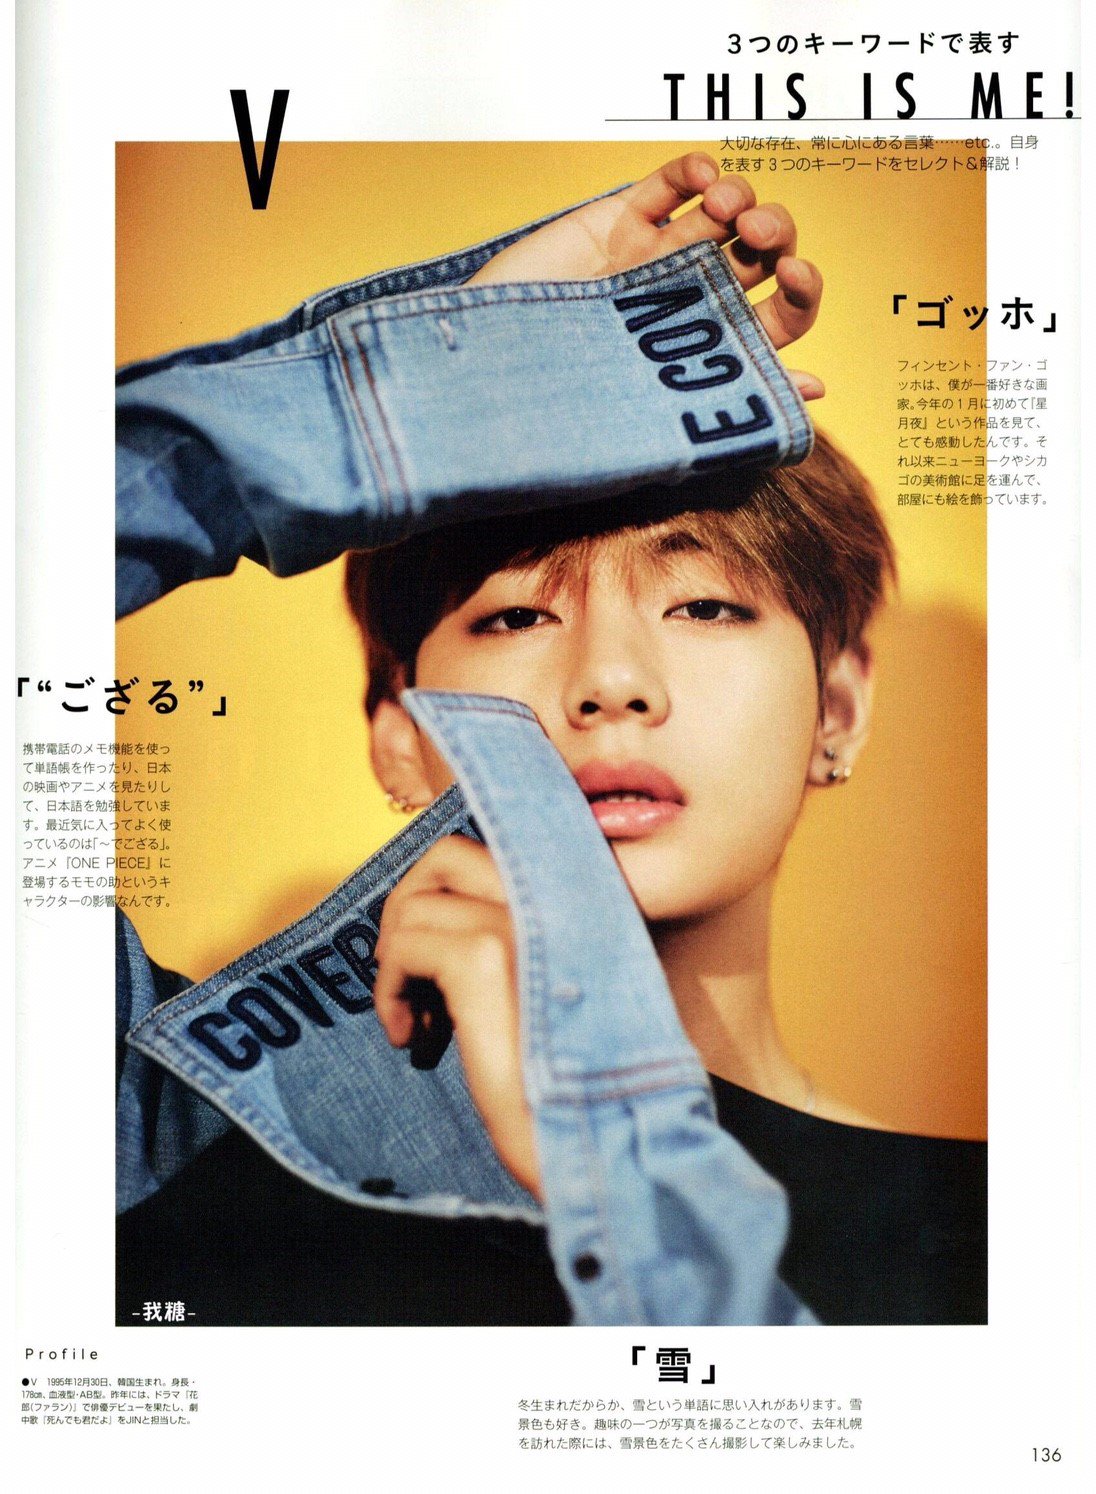 Picture/Scan] BTS at Non-no Magazine (August Issues) [170619] |